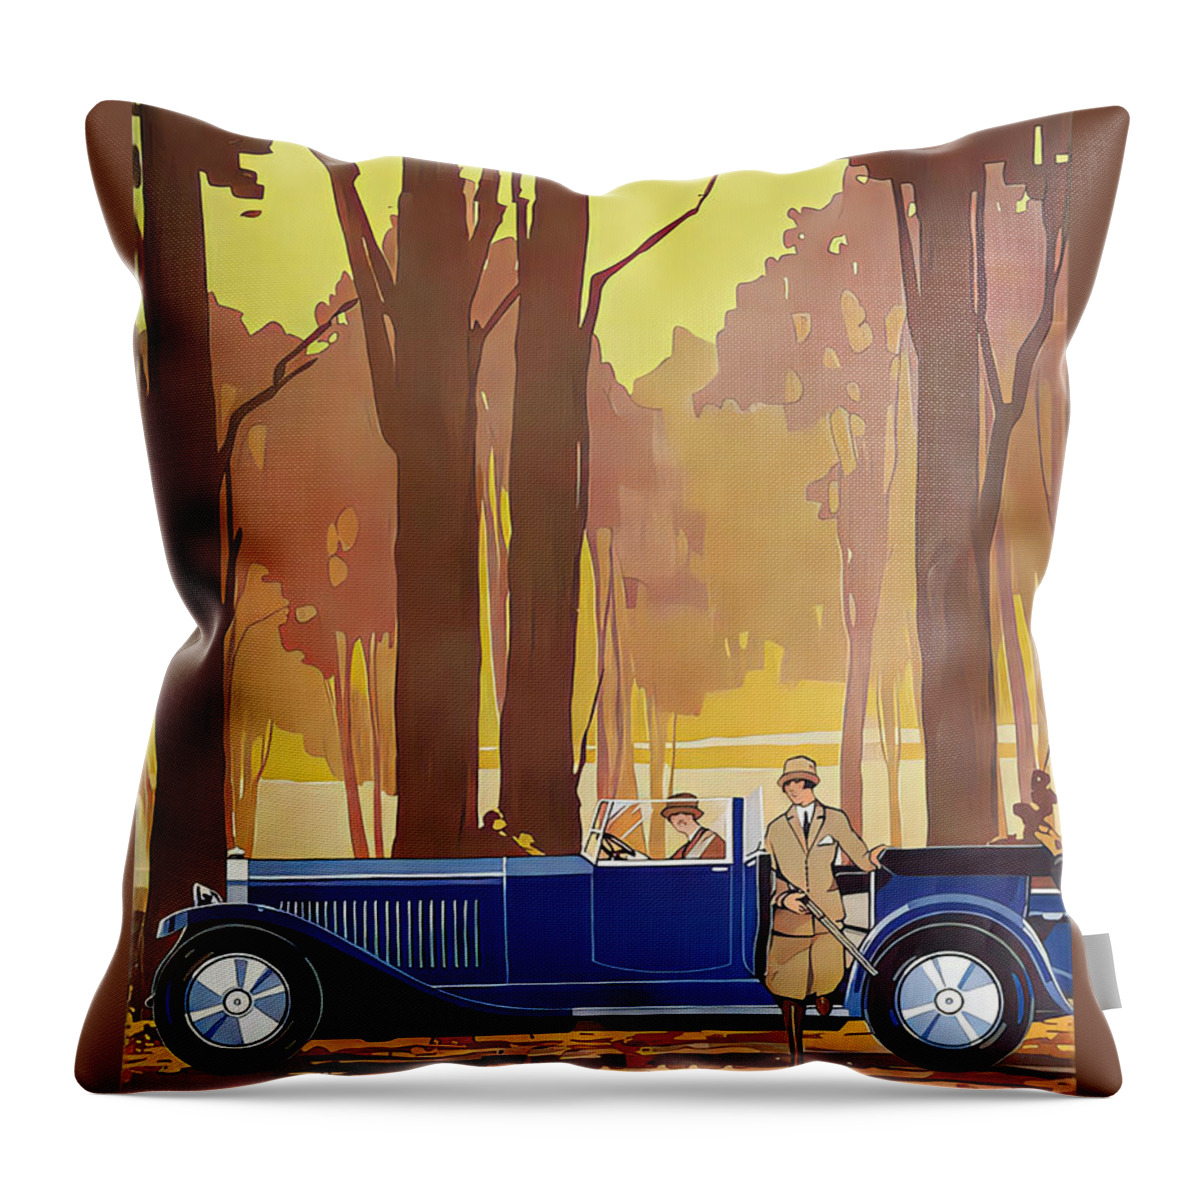 Vintage Throw Pillow featuring the mixed media 1927 Open Touring Car With Woman Hunters In Forest Setting Original French Art Deco Illustration by Retrographs